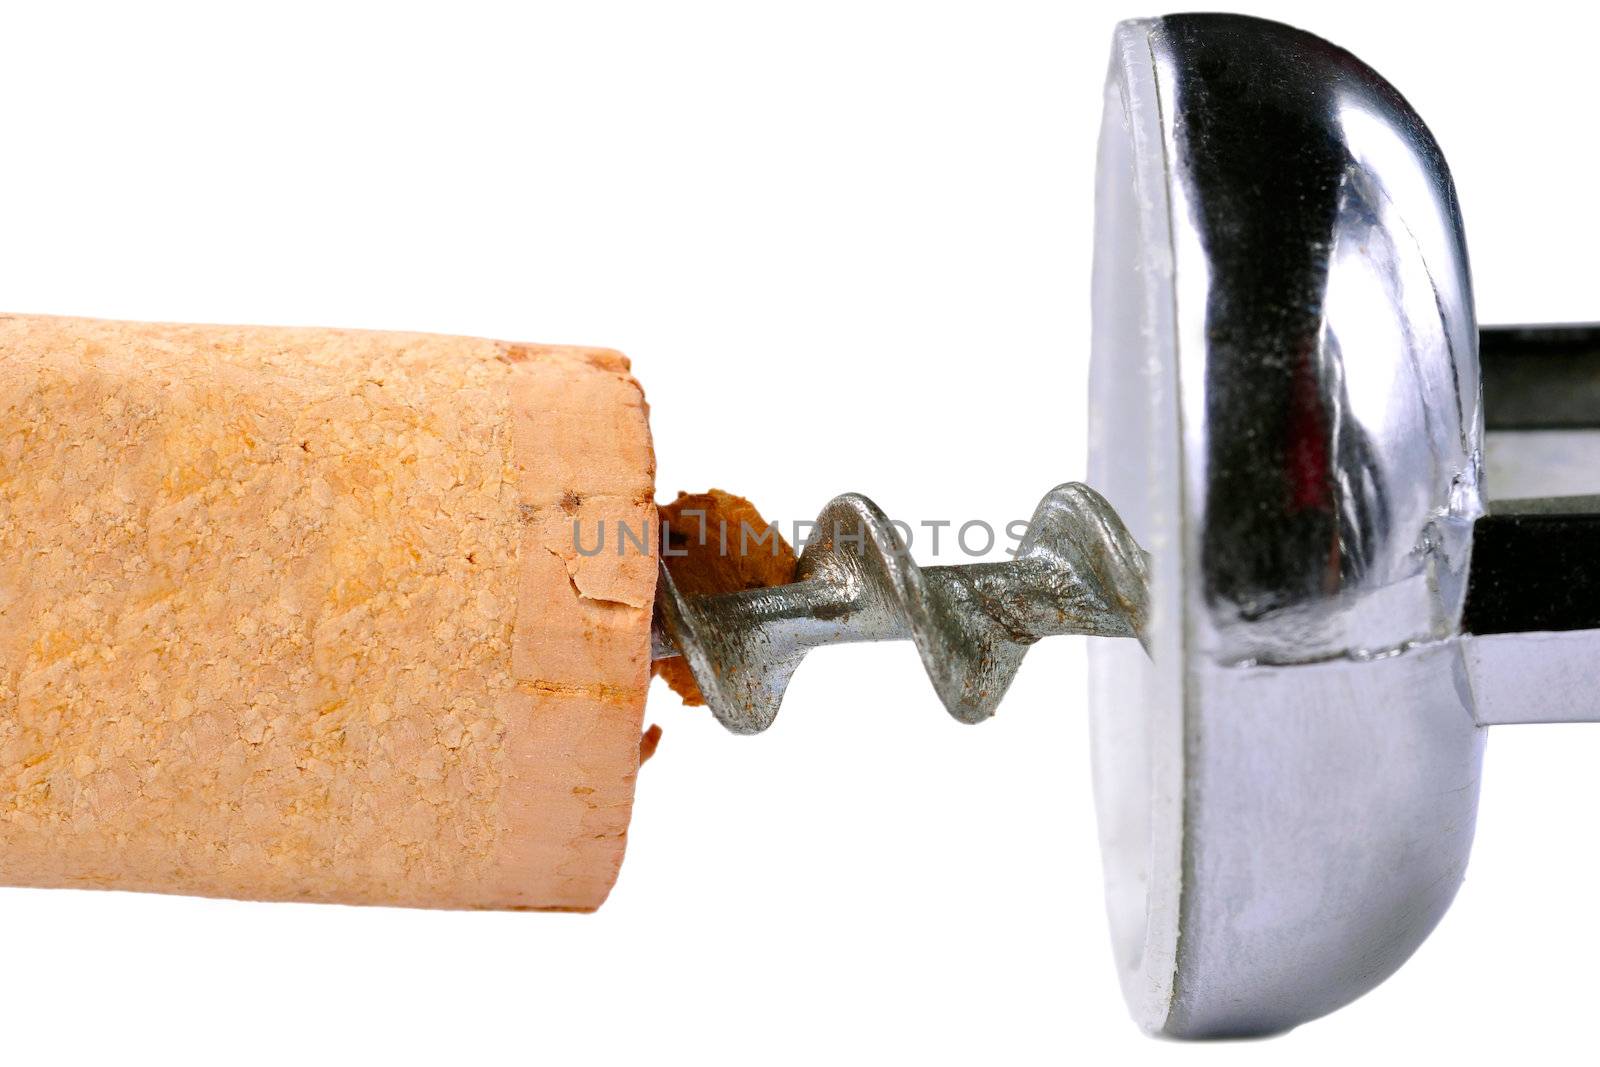 Closeup of a cork and a corkscrew, isolated